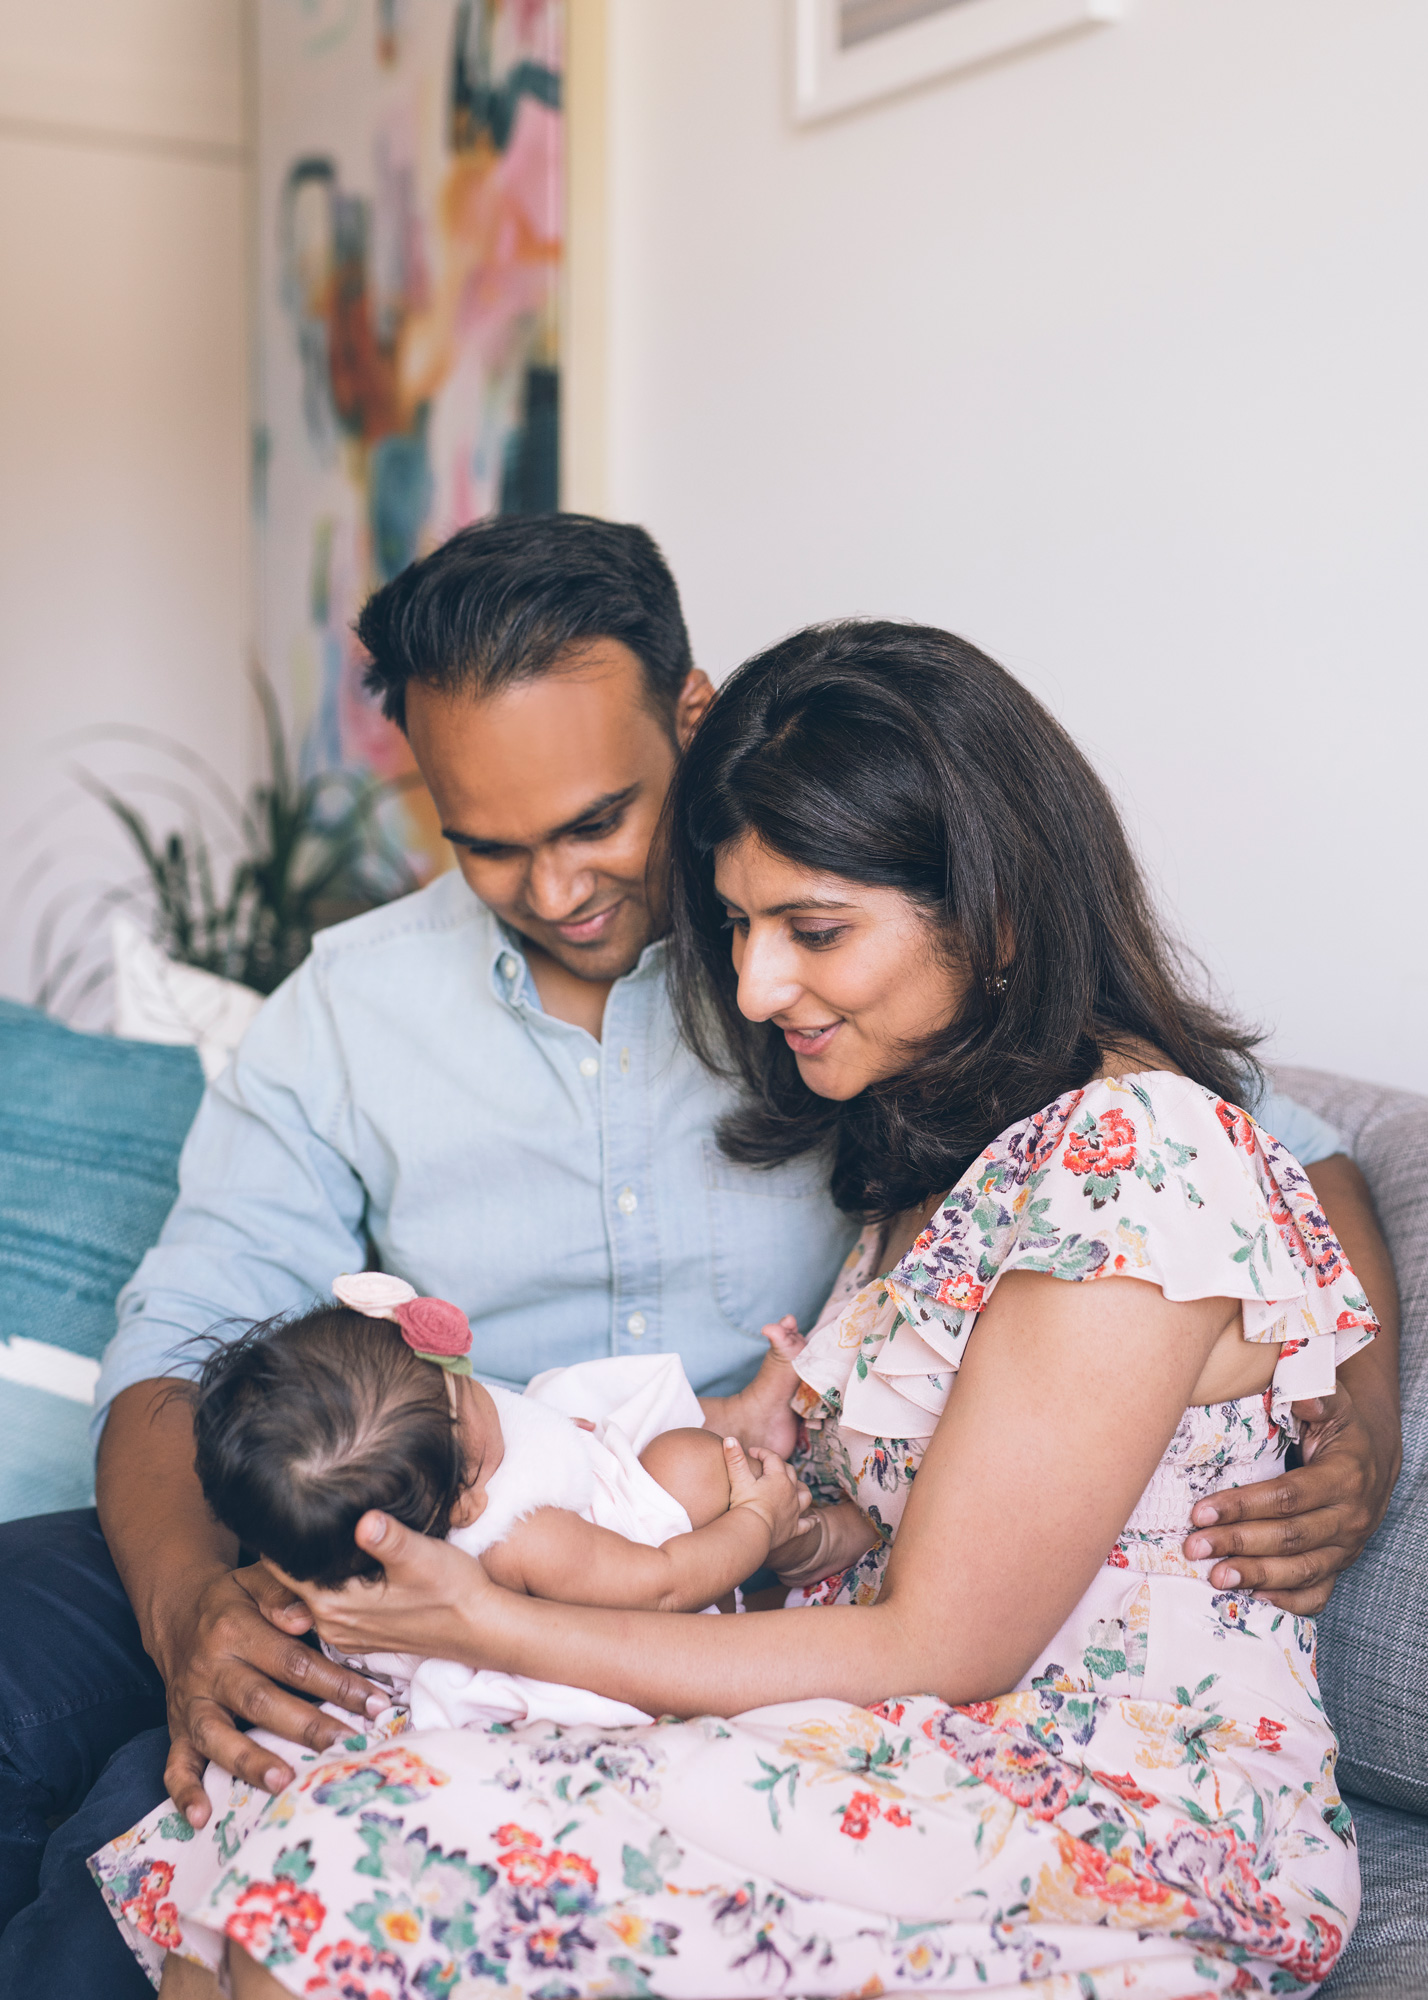 parents-holding-their-baby-girl-in-their-san-francisco-apartment.jpg